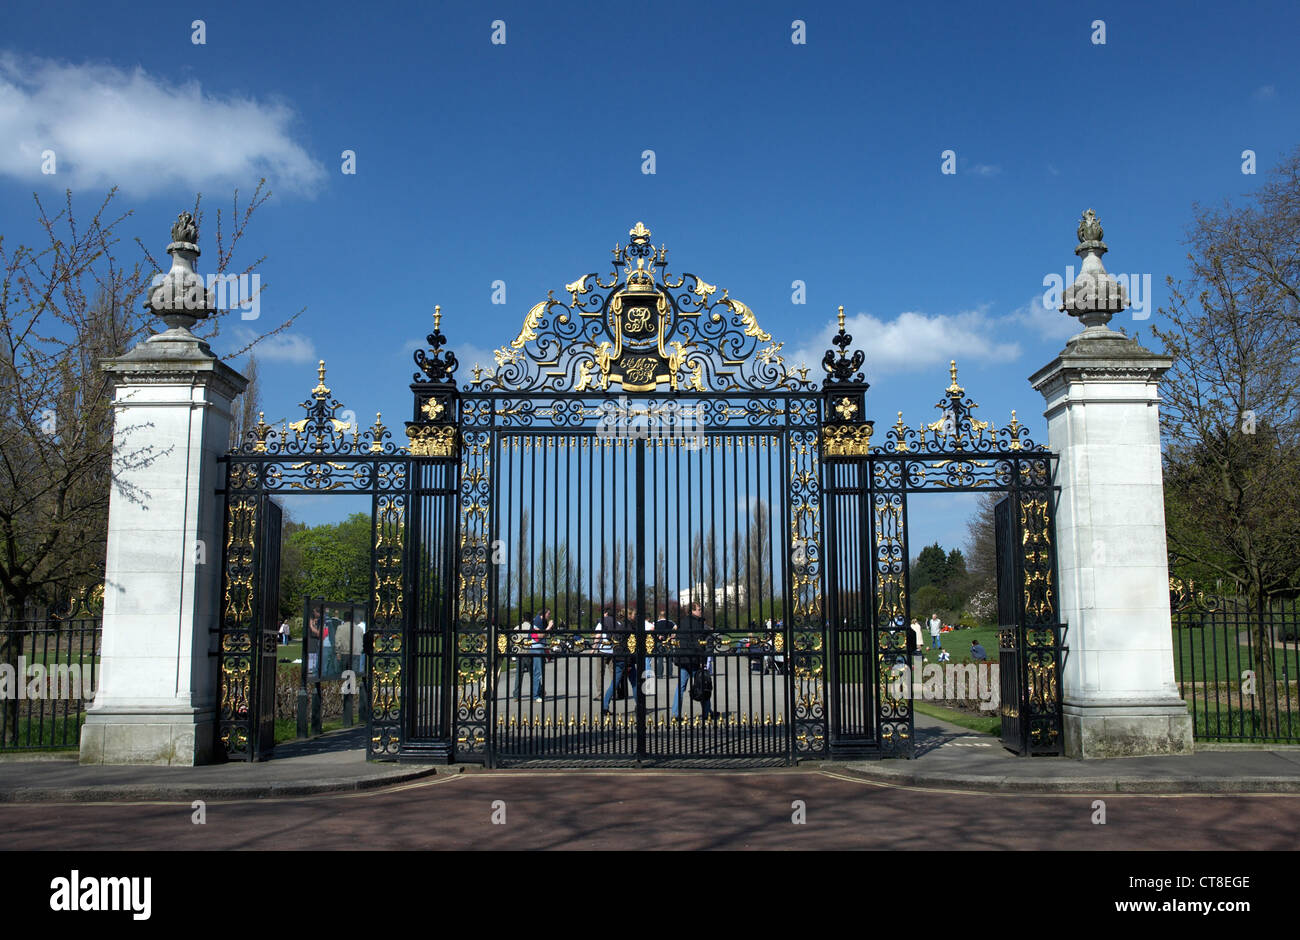 London - entrance to the Queen Mary's Gardens Stock Photo